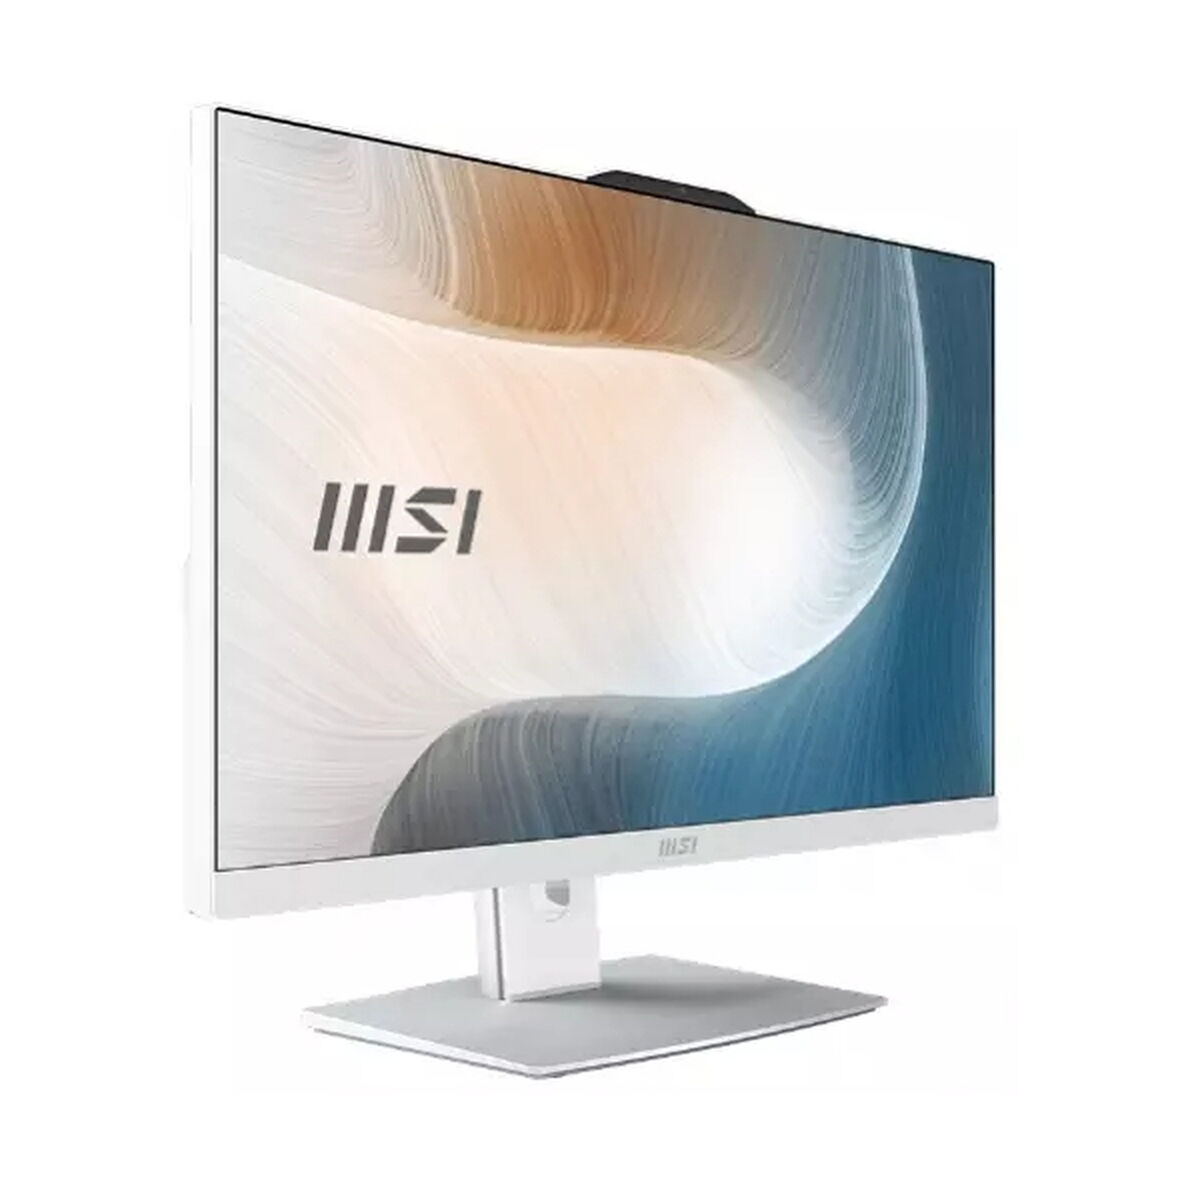 All in One MSI 9S6-AE0122-1005 16 GB 1 TB + 256 GB SSD 23.8"